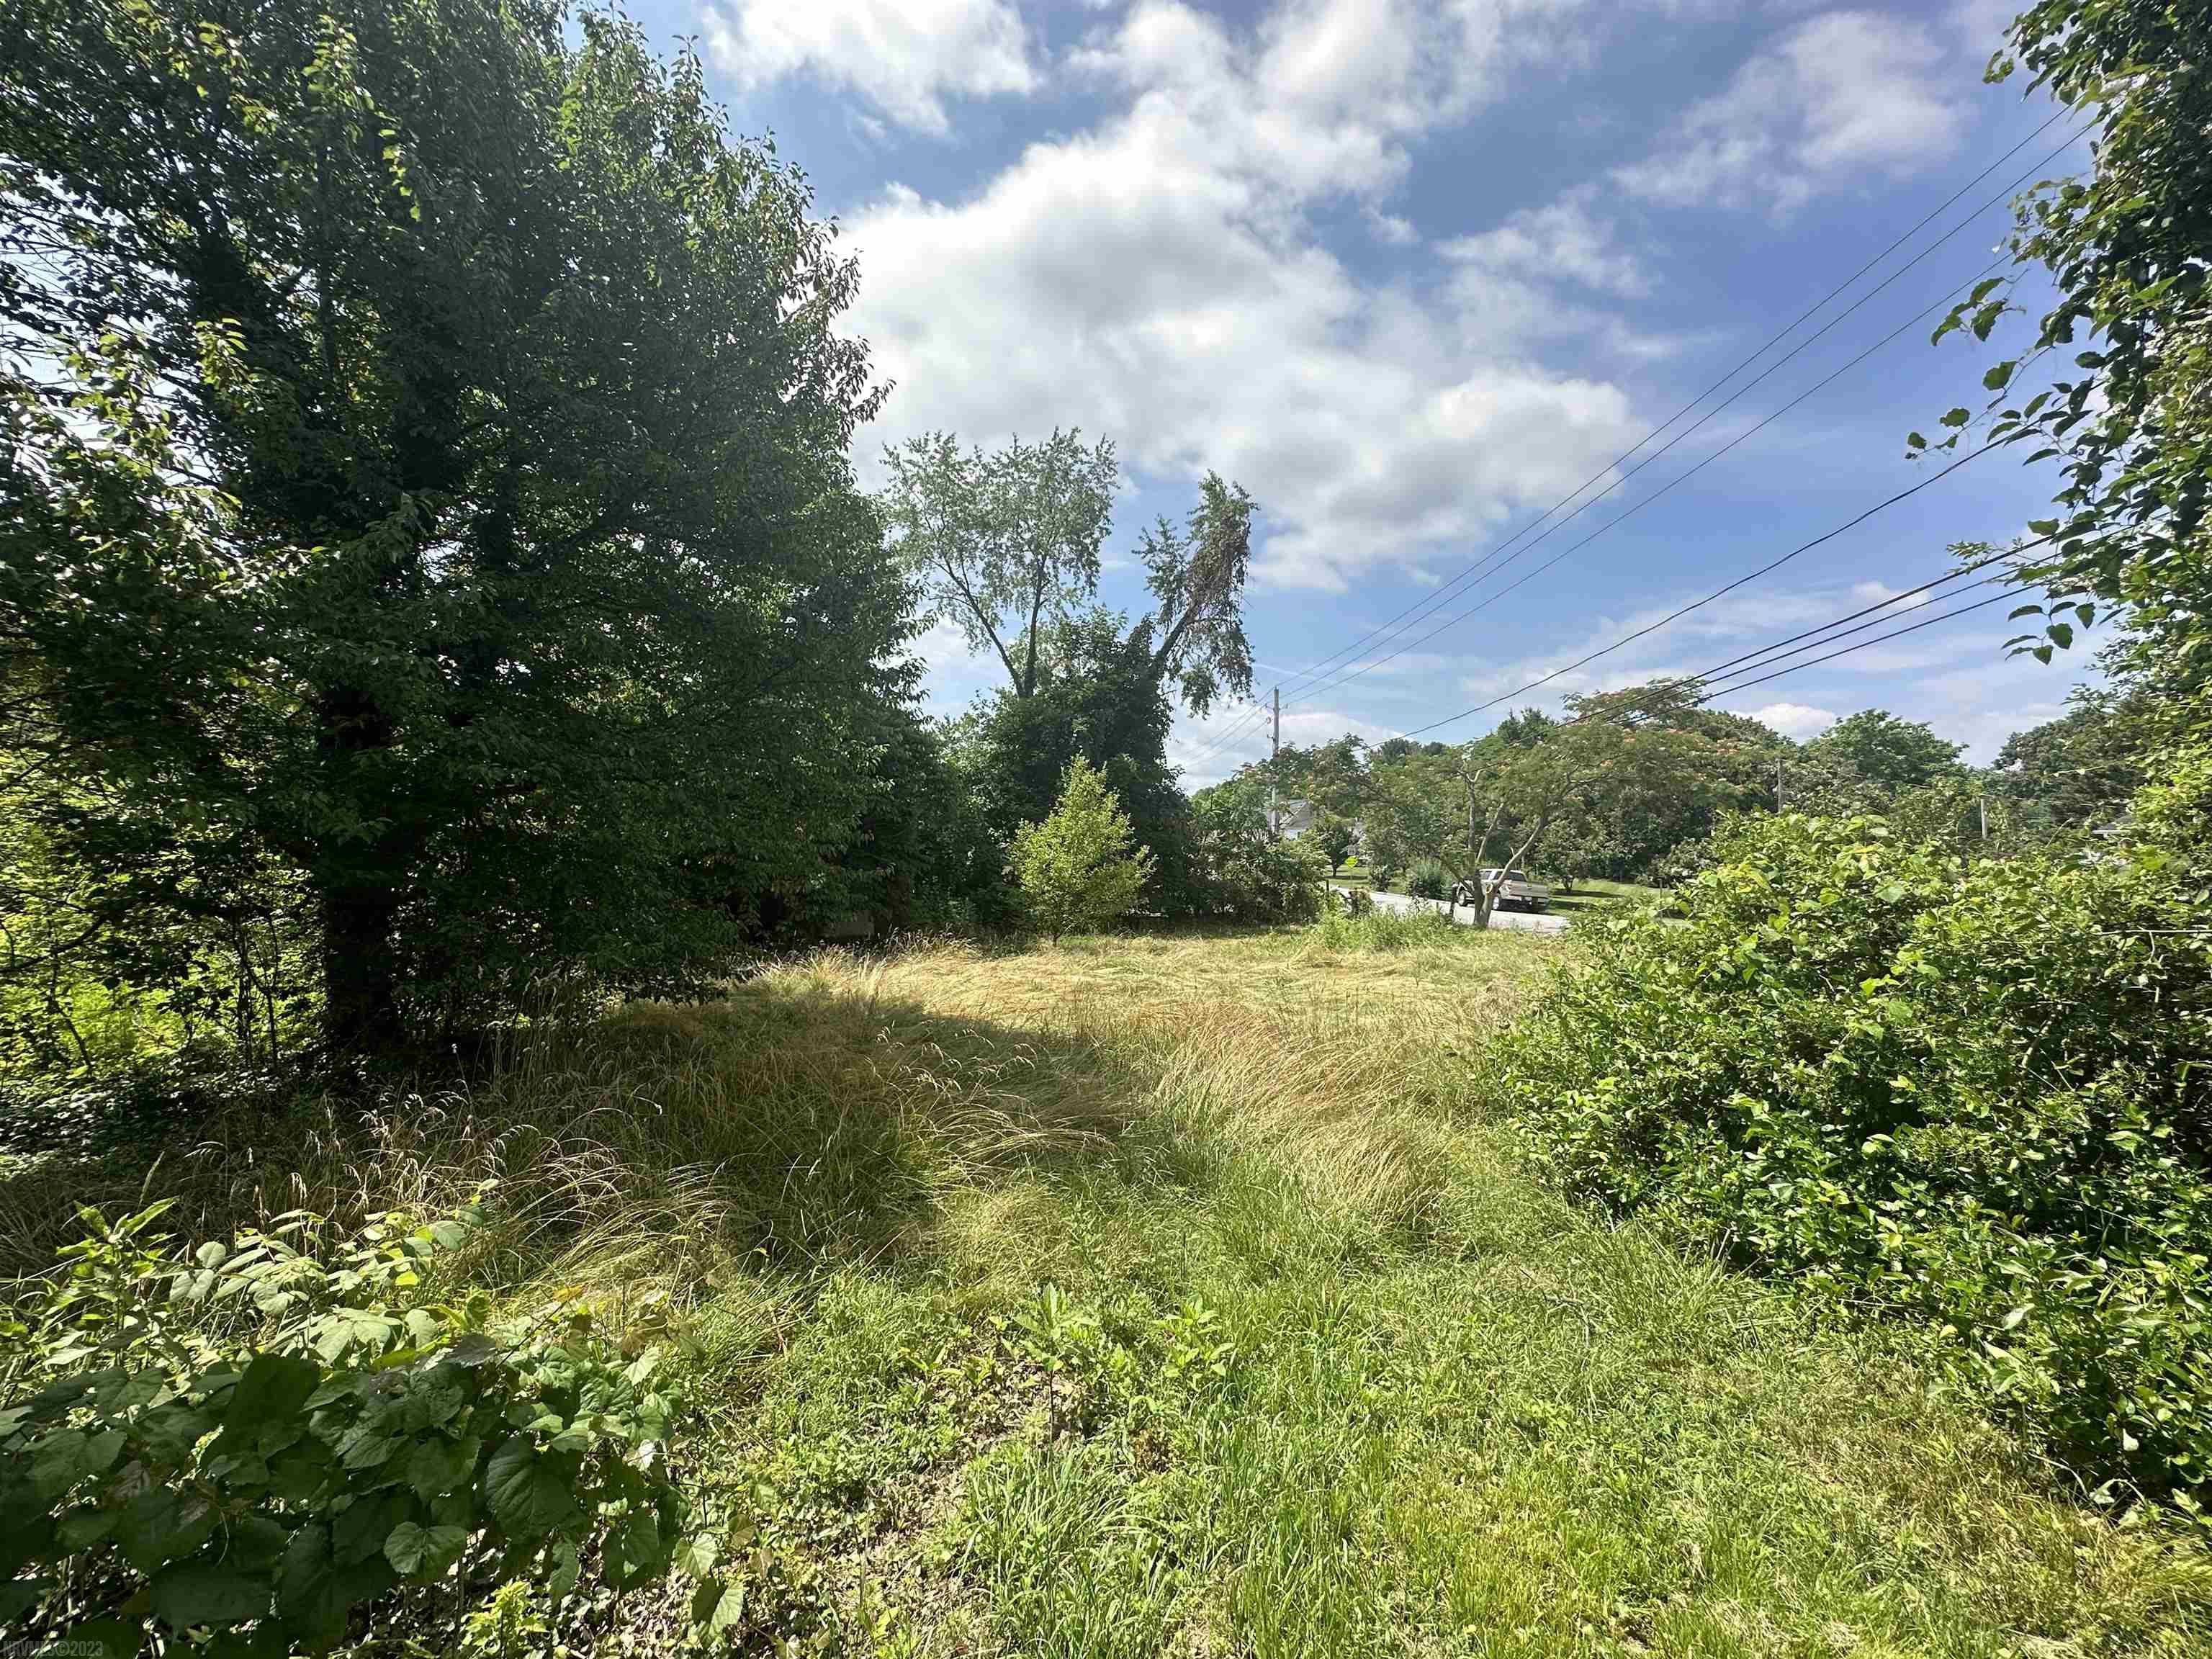 Rare opportunity to build in a highly sought after area of the Town of Christiansburg! Level lot with public utilities available. Parcel has required square footage and road frontage to build a detached single family home.